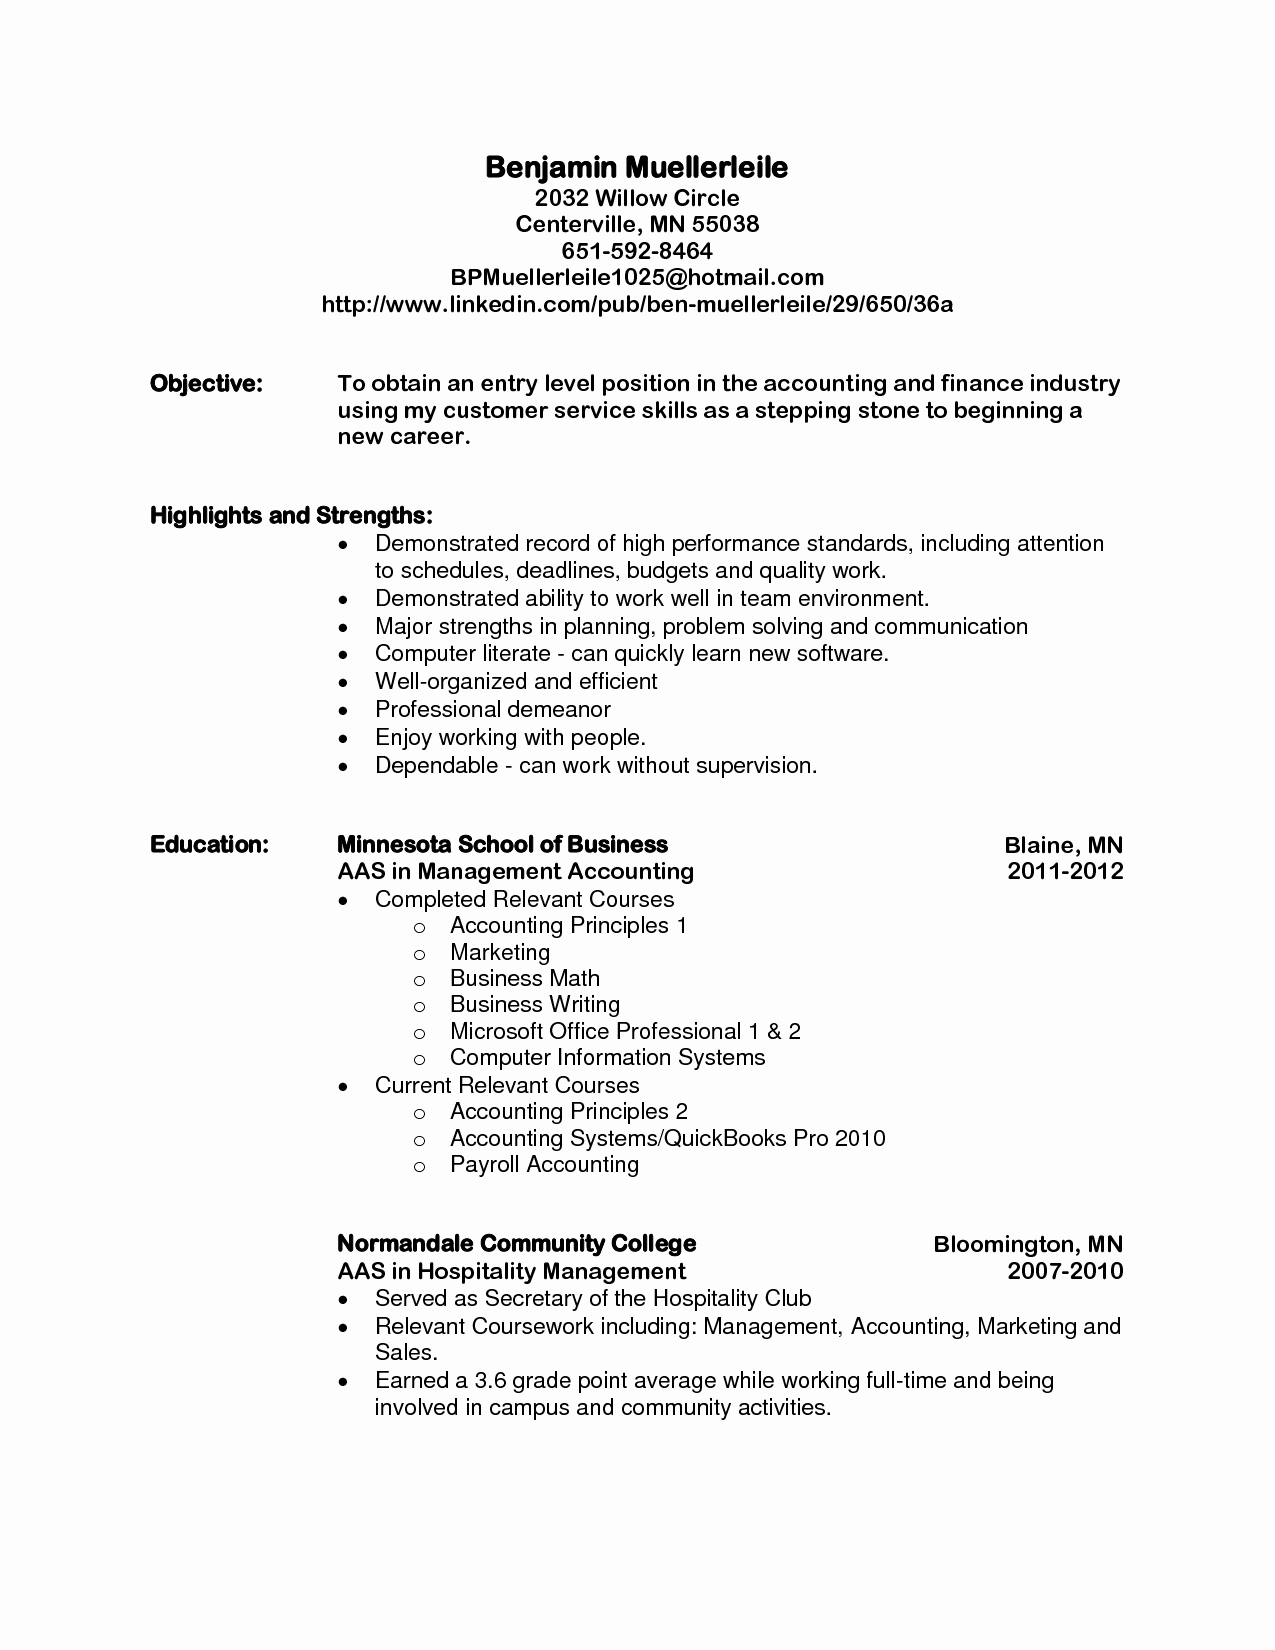 Entry Level Resume Sample Objective Accounting Student for